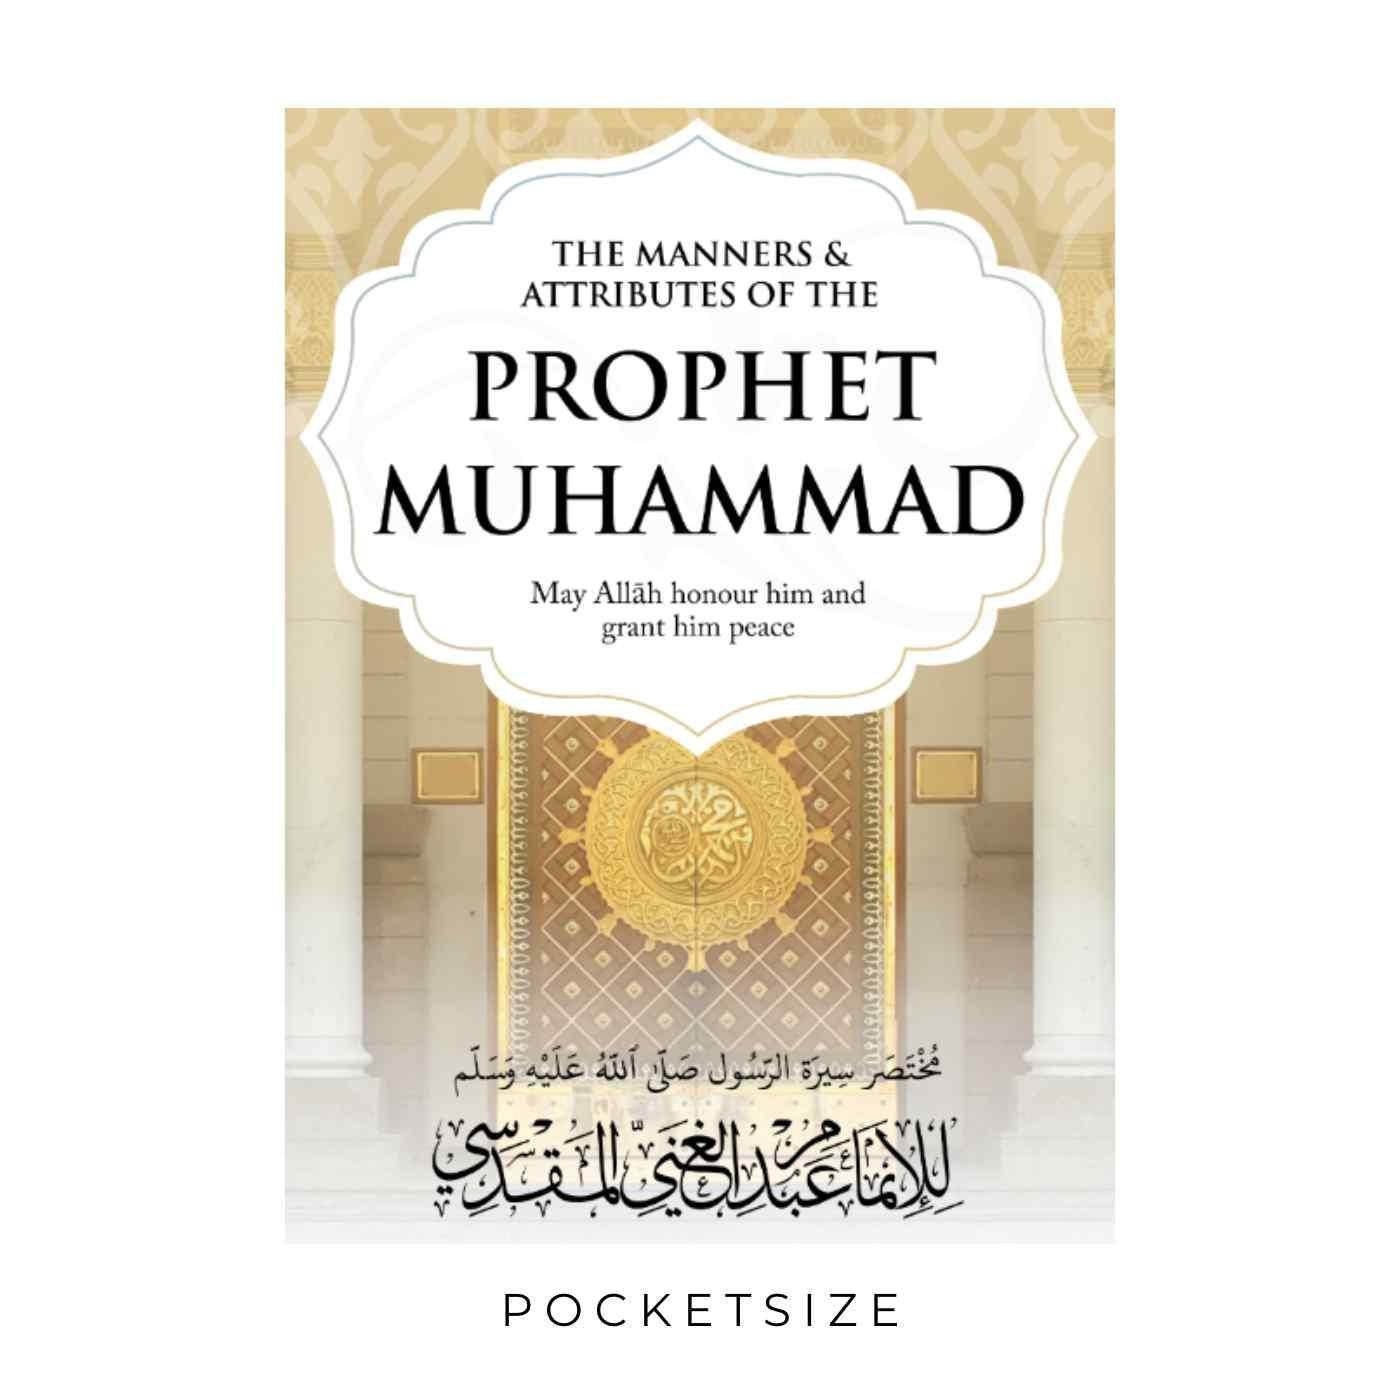 The Manners & Attributes Of The Prophet Muhammad